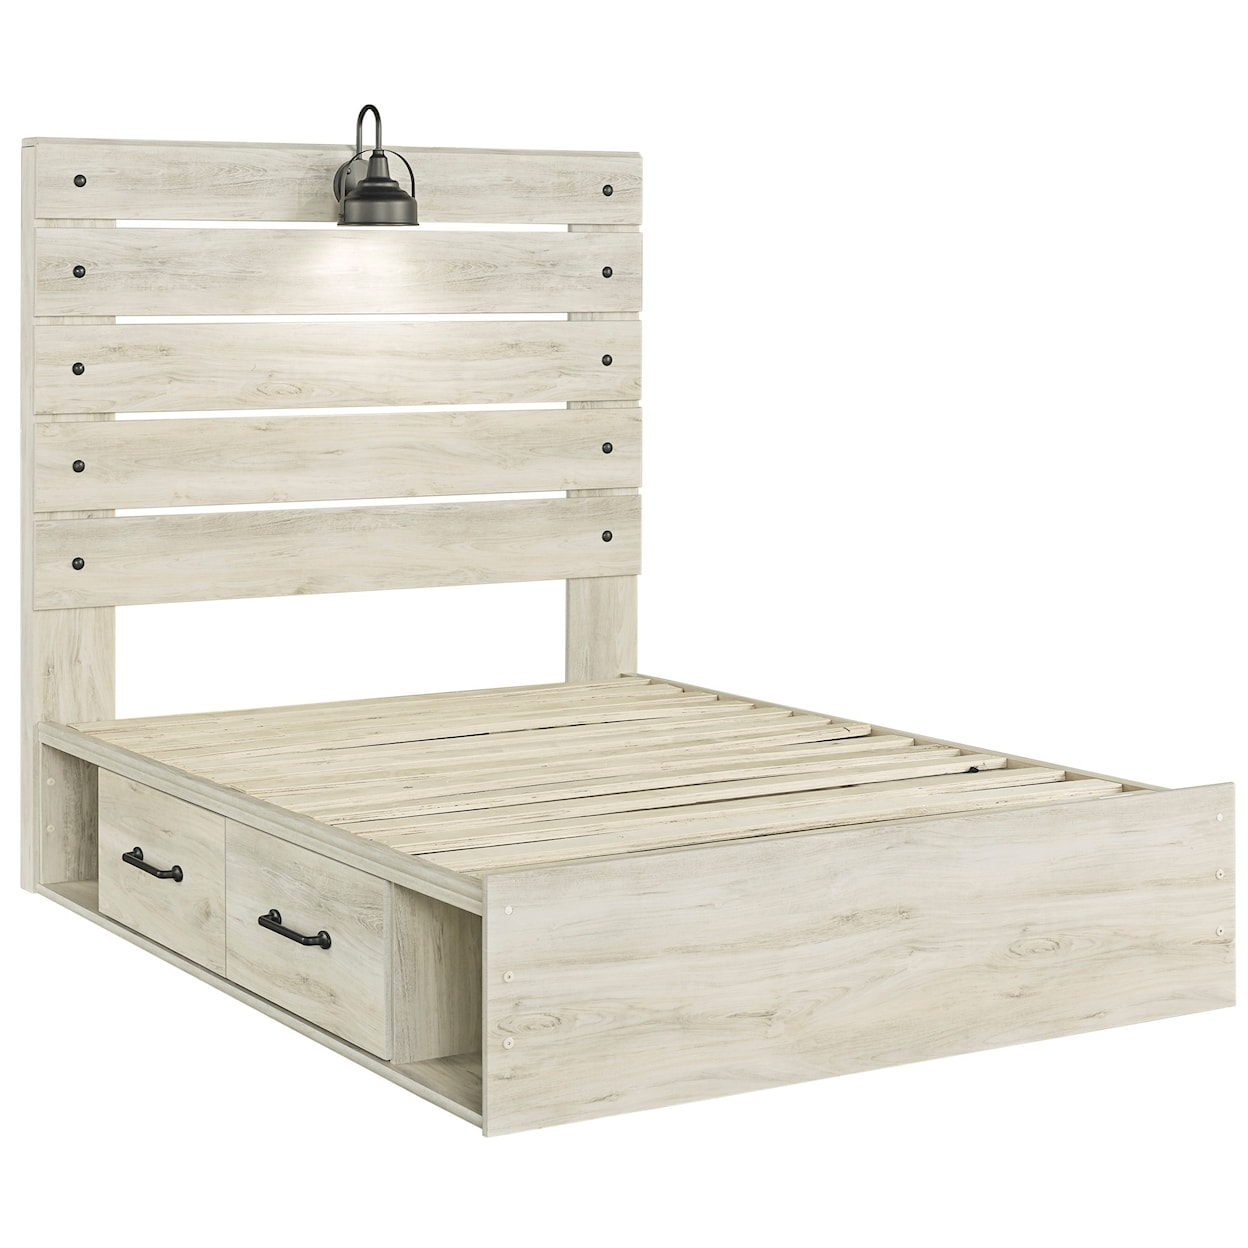 Signature Design by Ashley Furniture Cambeck Full Storage Bed with 2 Drawers